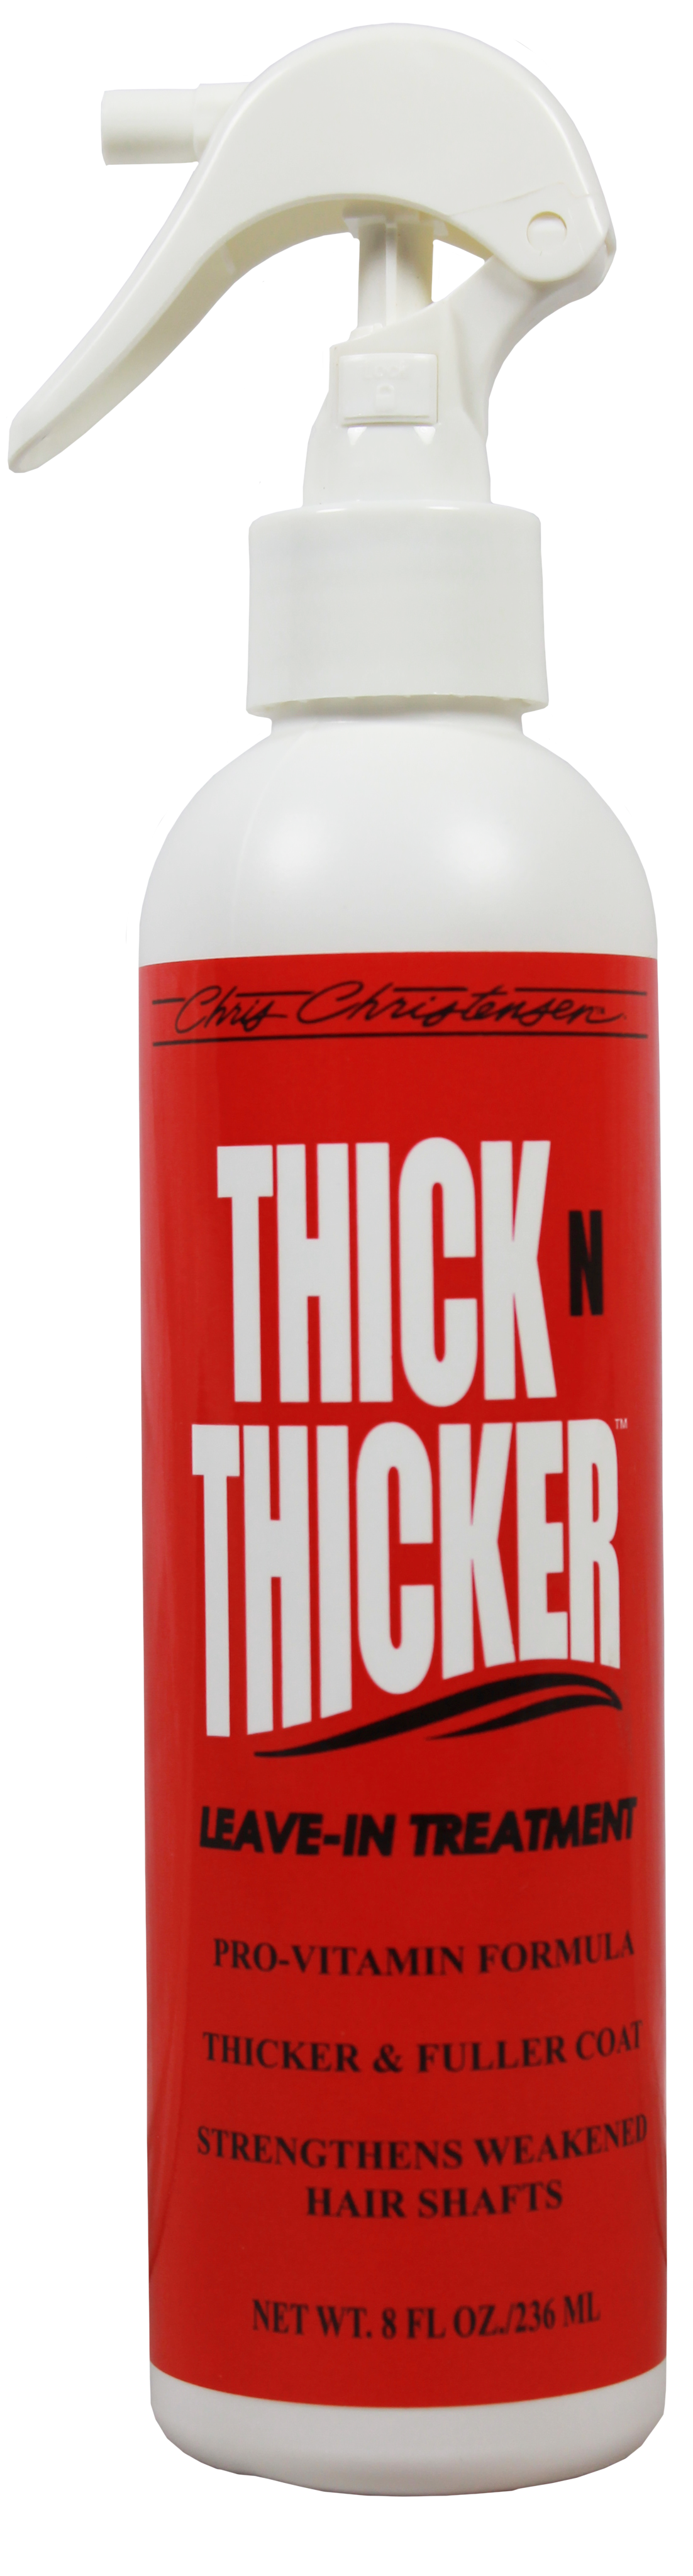 Спрей для объема и густоты шерсти Thick N Thicker Leave-In 